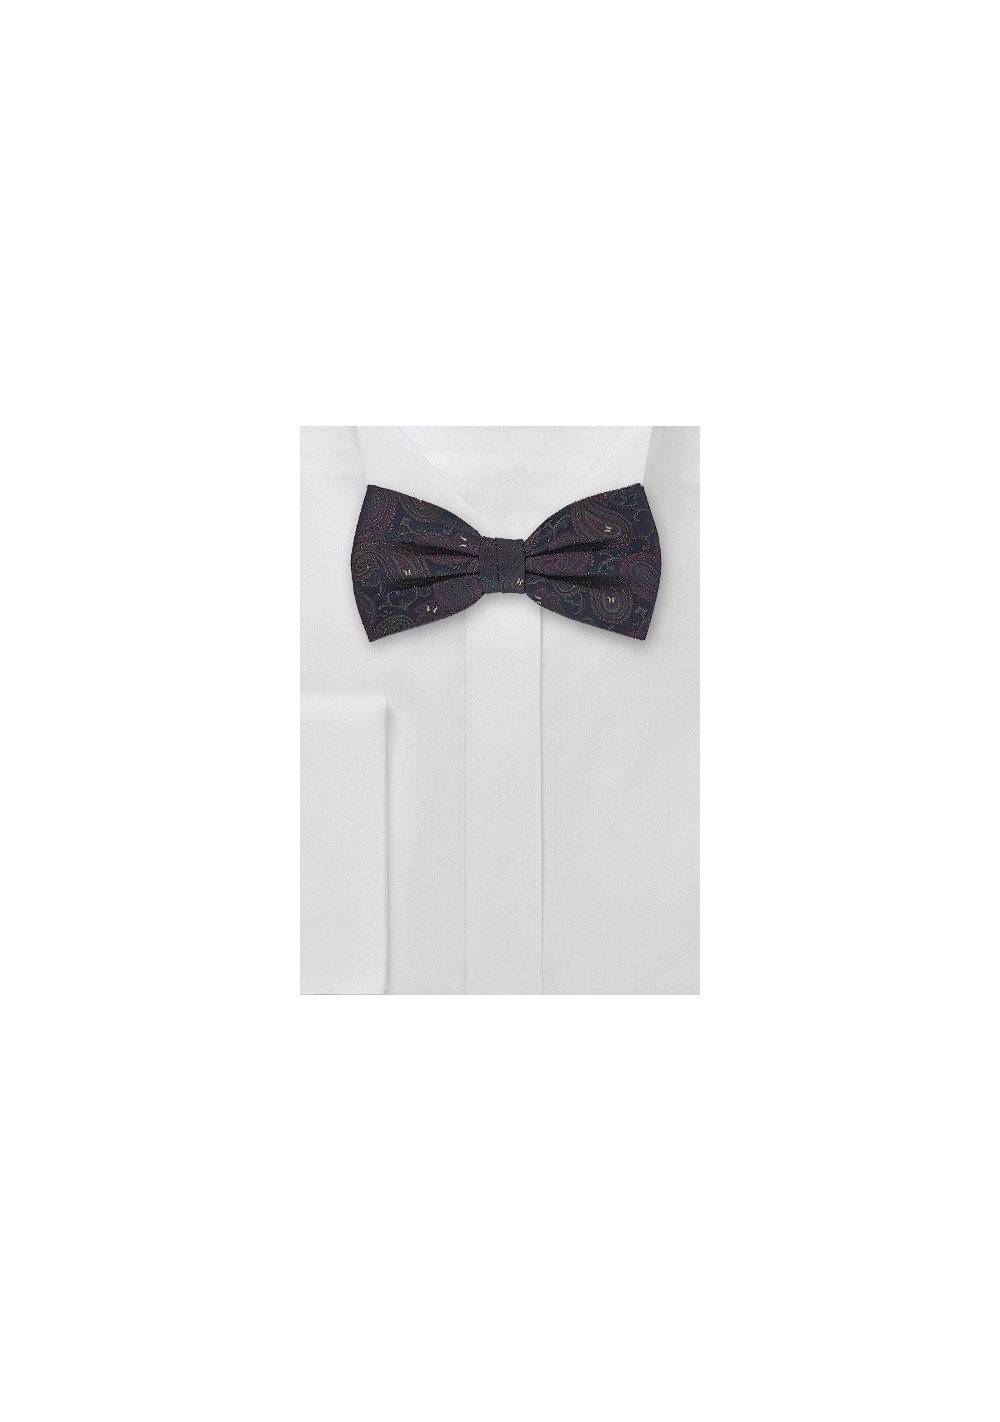 Midnight Blue Bow Tie with Plum Accents